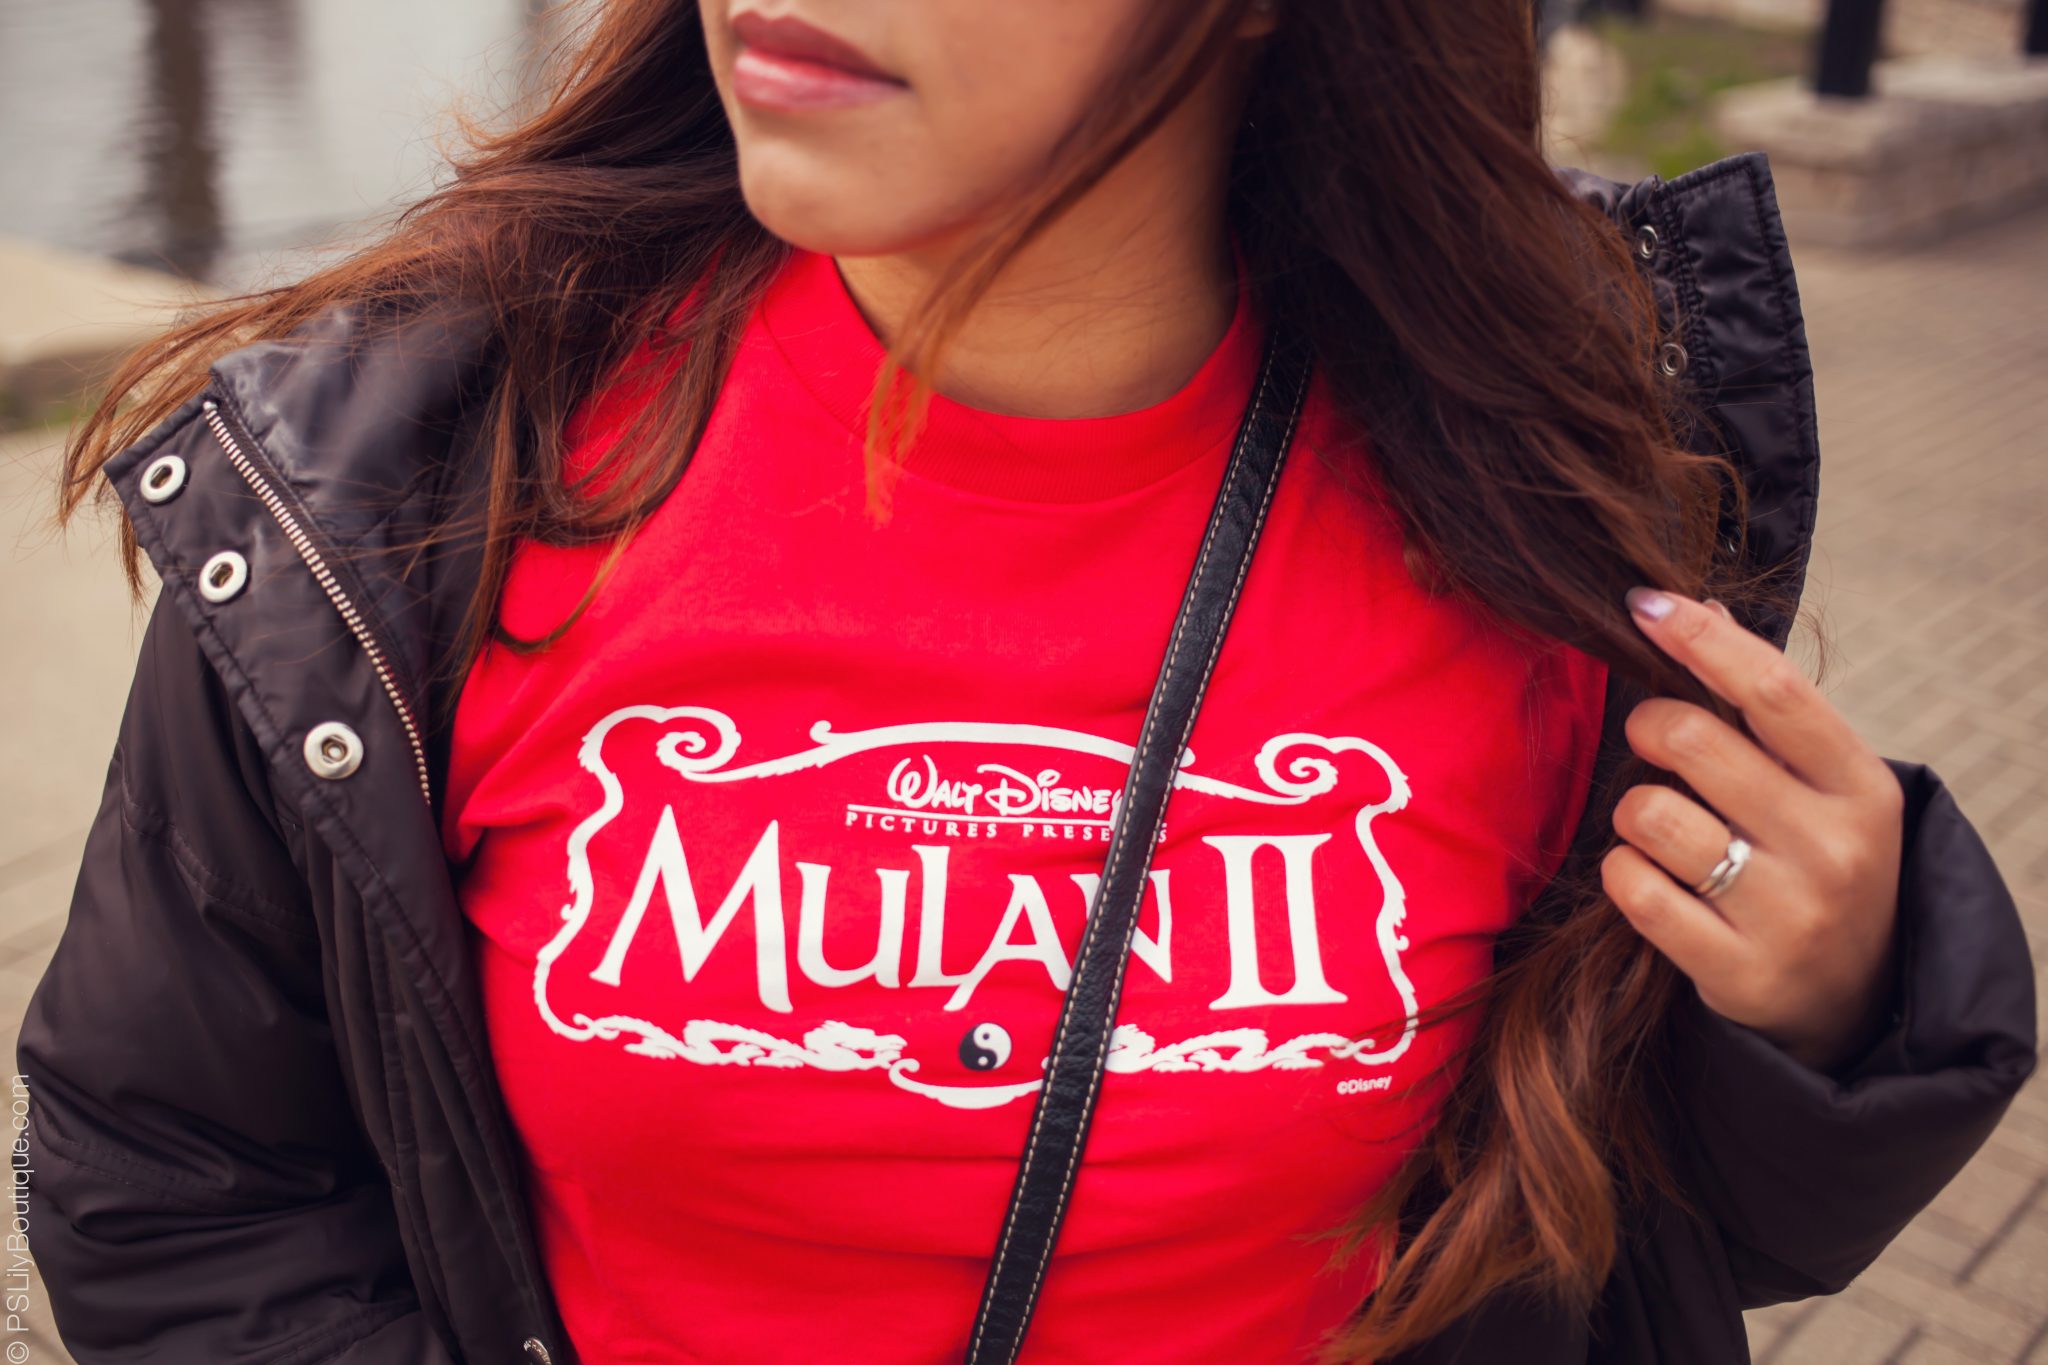 instagram-pslilyboutique-los-angeles-fashion-blogger-mulan-2-walt-disney-pictures-red-tee-streetstyle-4-6-16